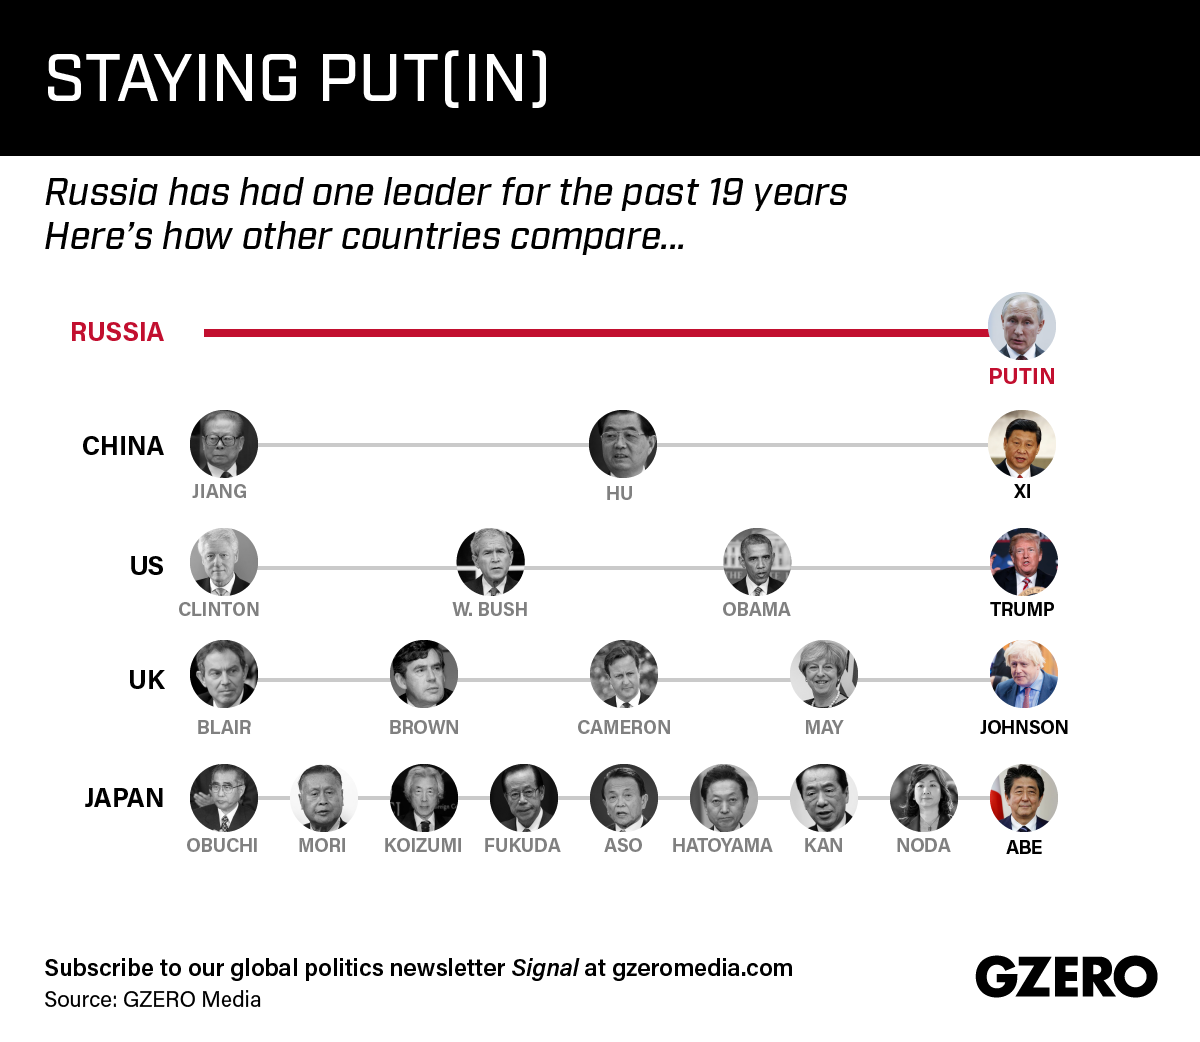 Here's a visual reminder of just how long Russia's strongman Vladimir Putin has dominated his country.